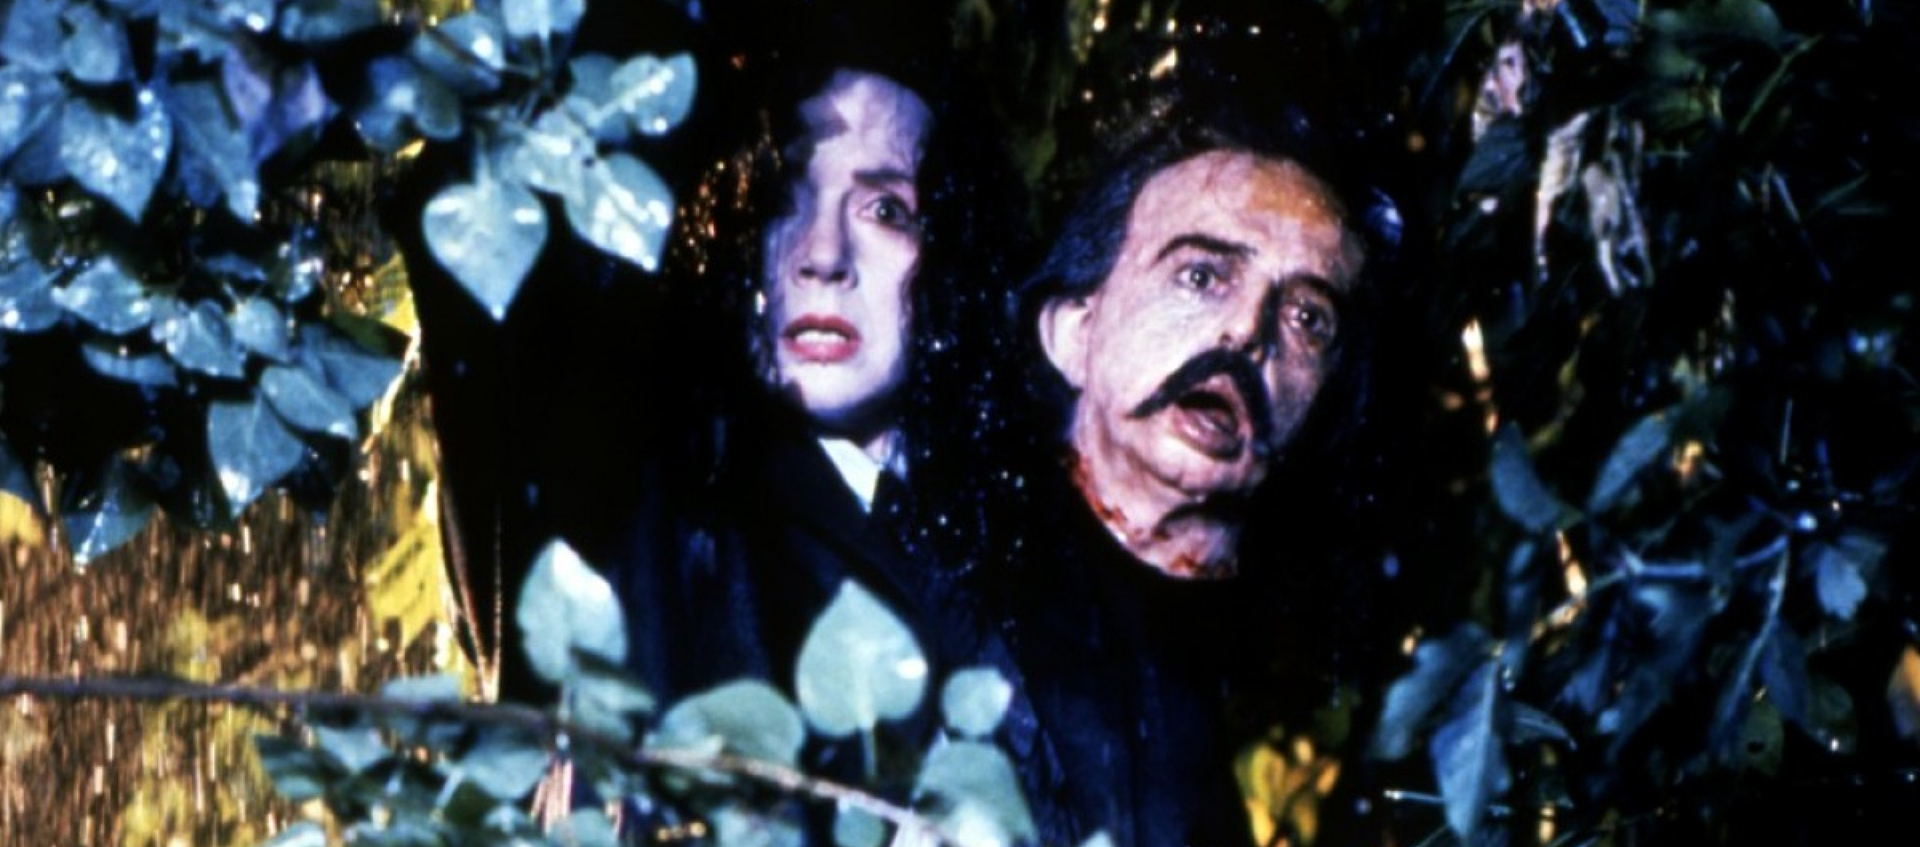 A distorted image of a woman holding a man’s head. She appears to be standing in a bush; the faces are framed by green leaves.